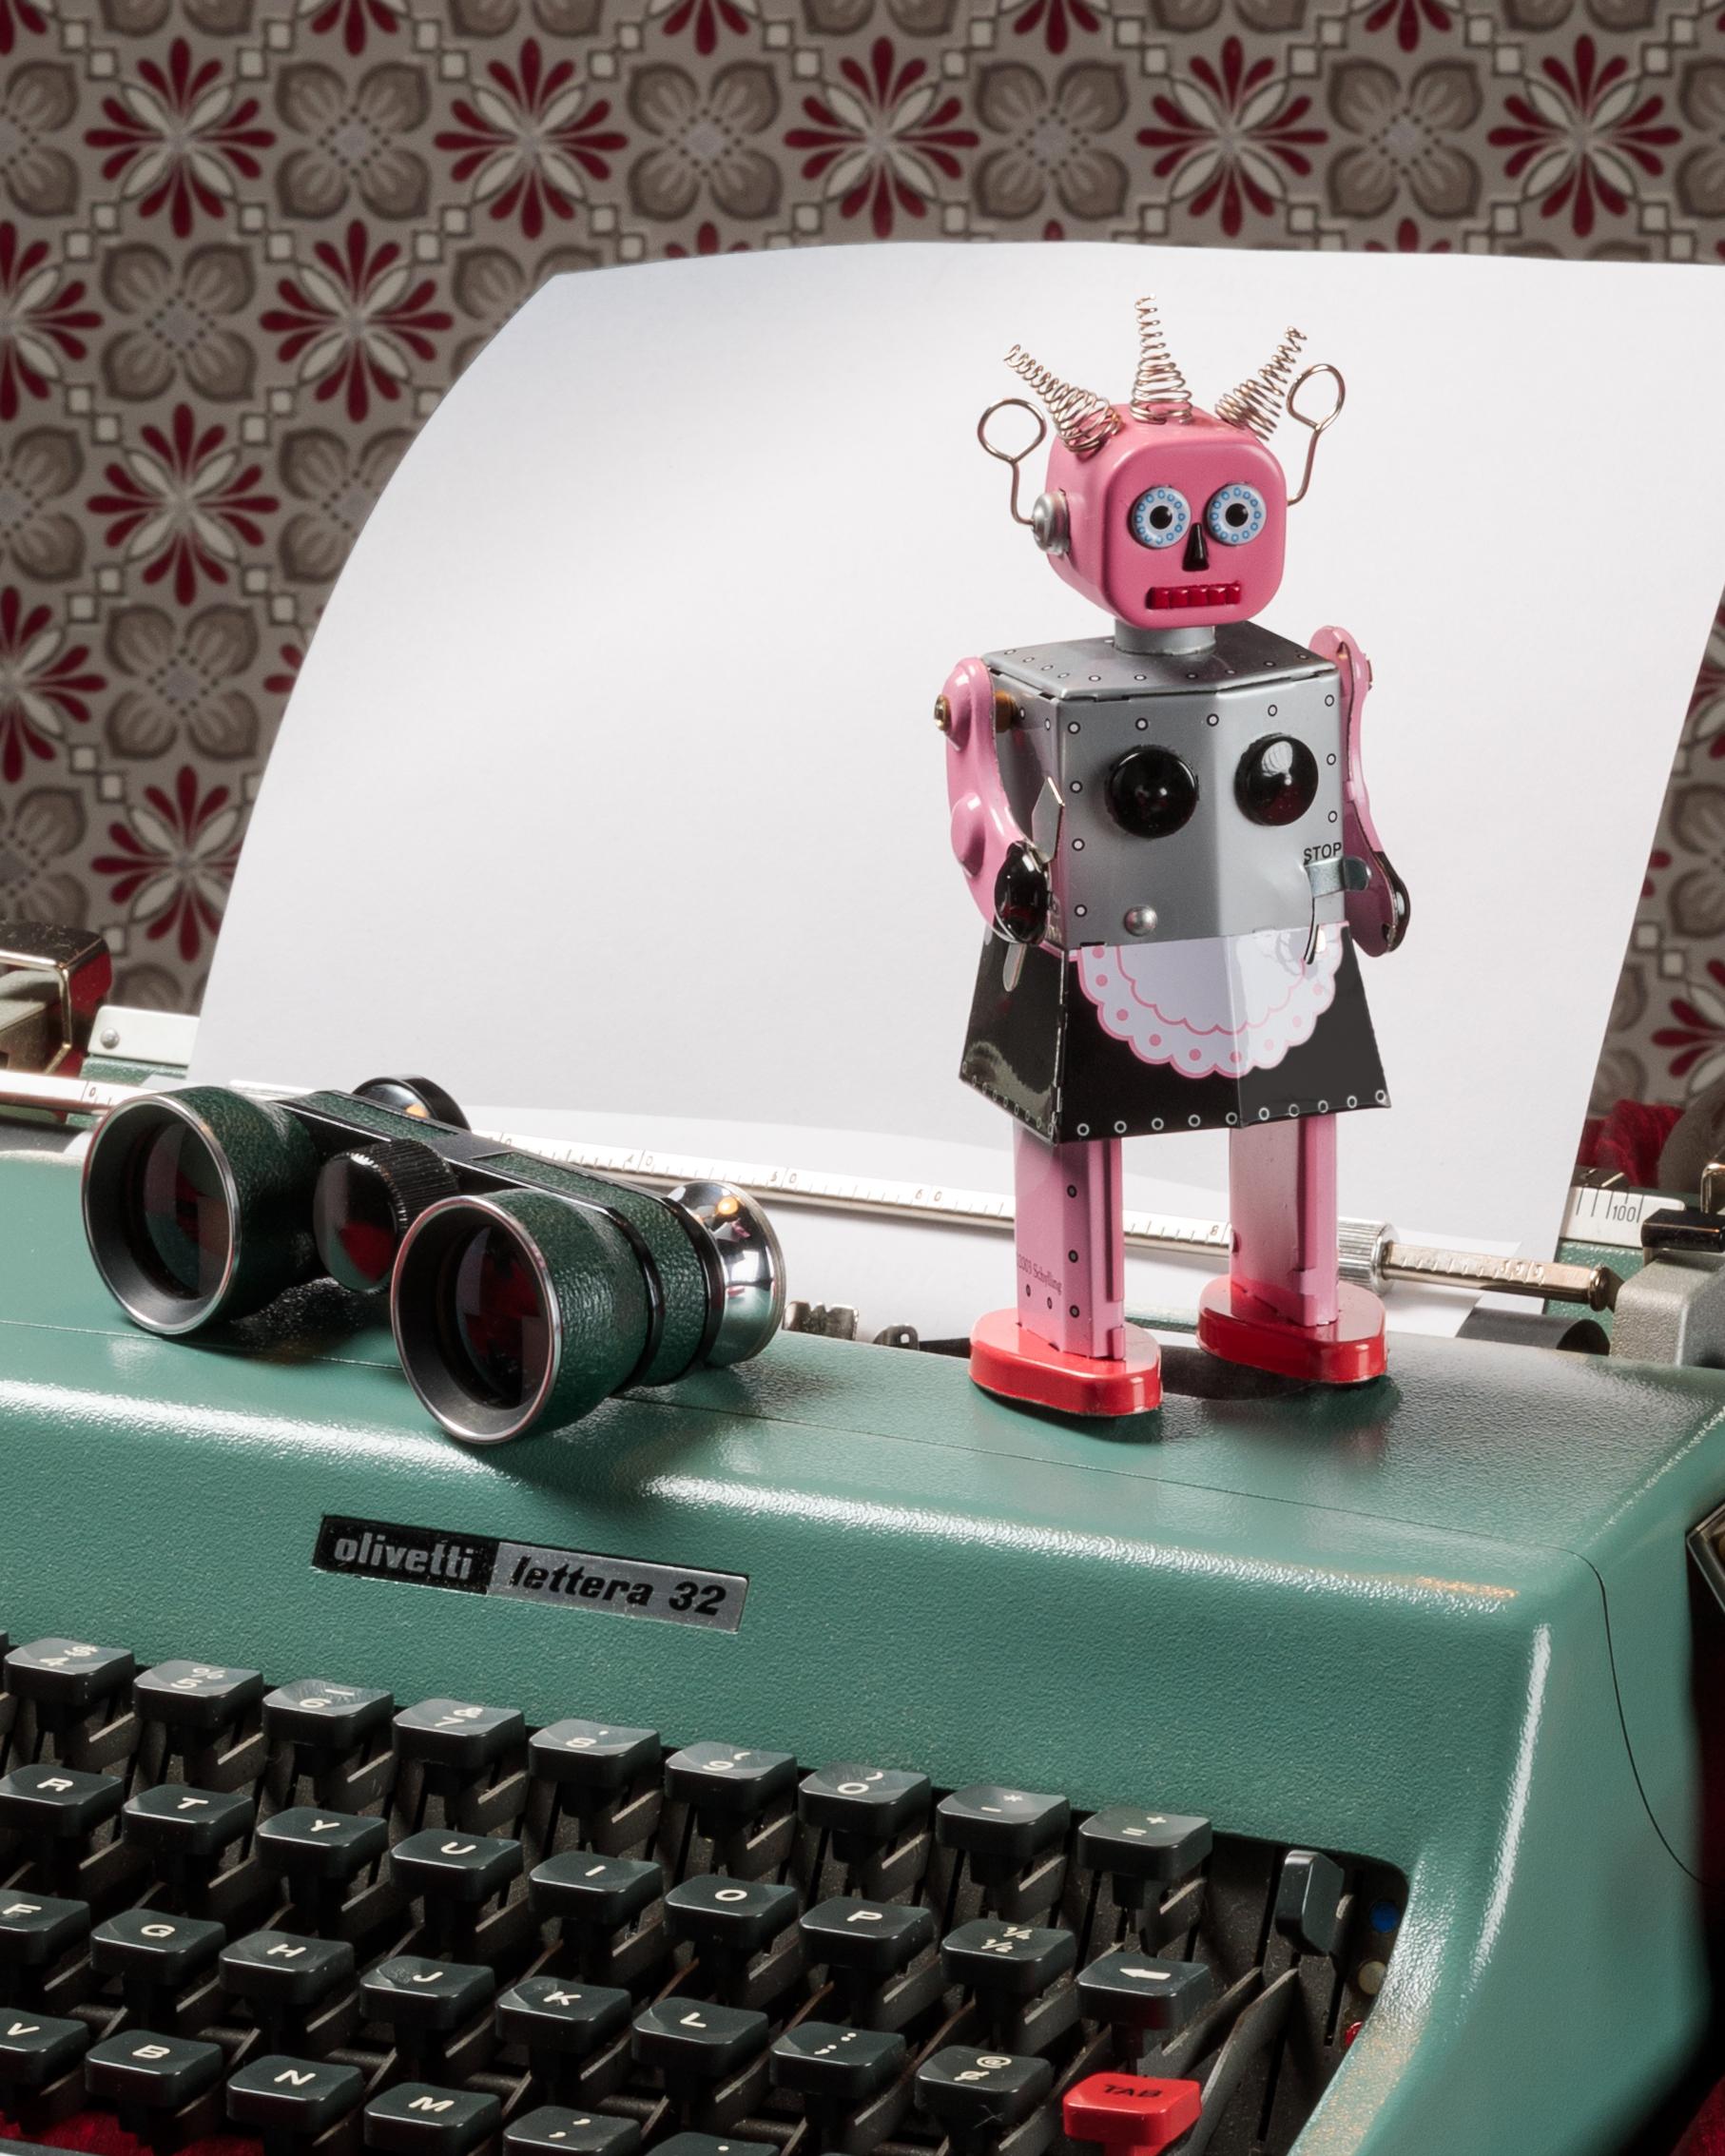 “Still Life with Robot” Contemporary Still-life Photo with Vintage Typewriter For Sale 1